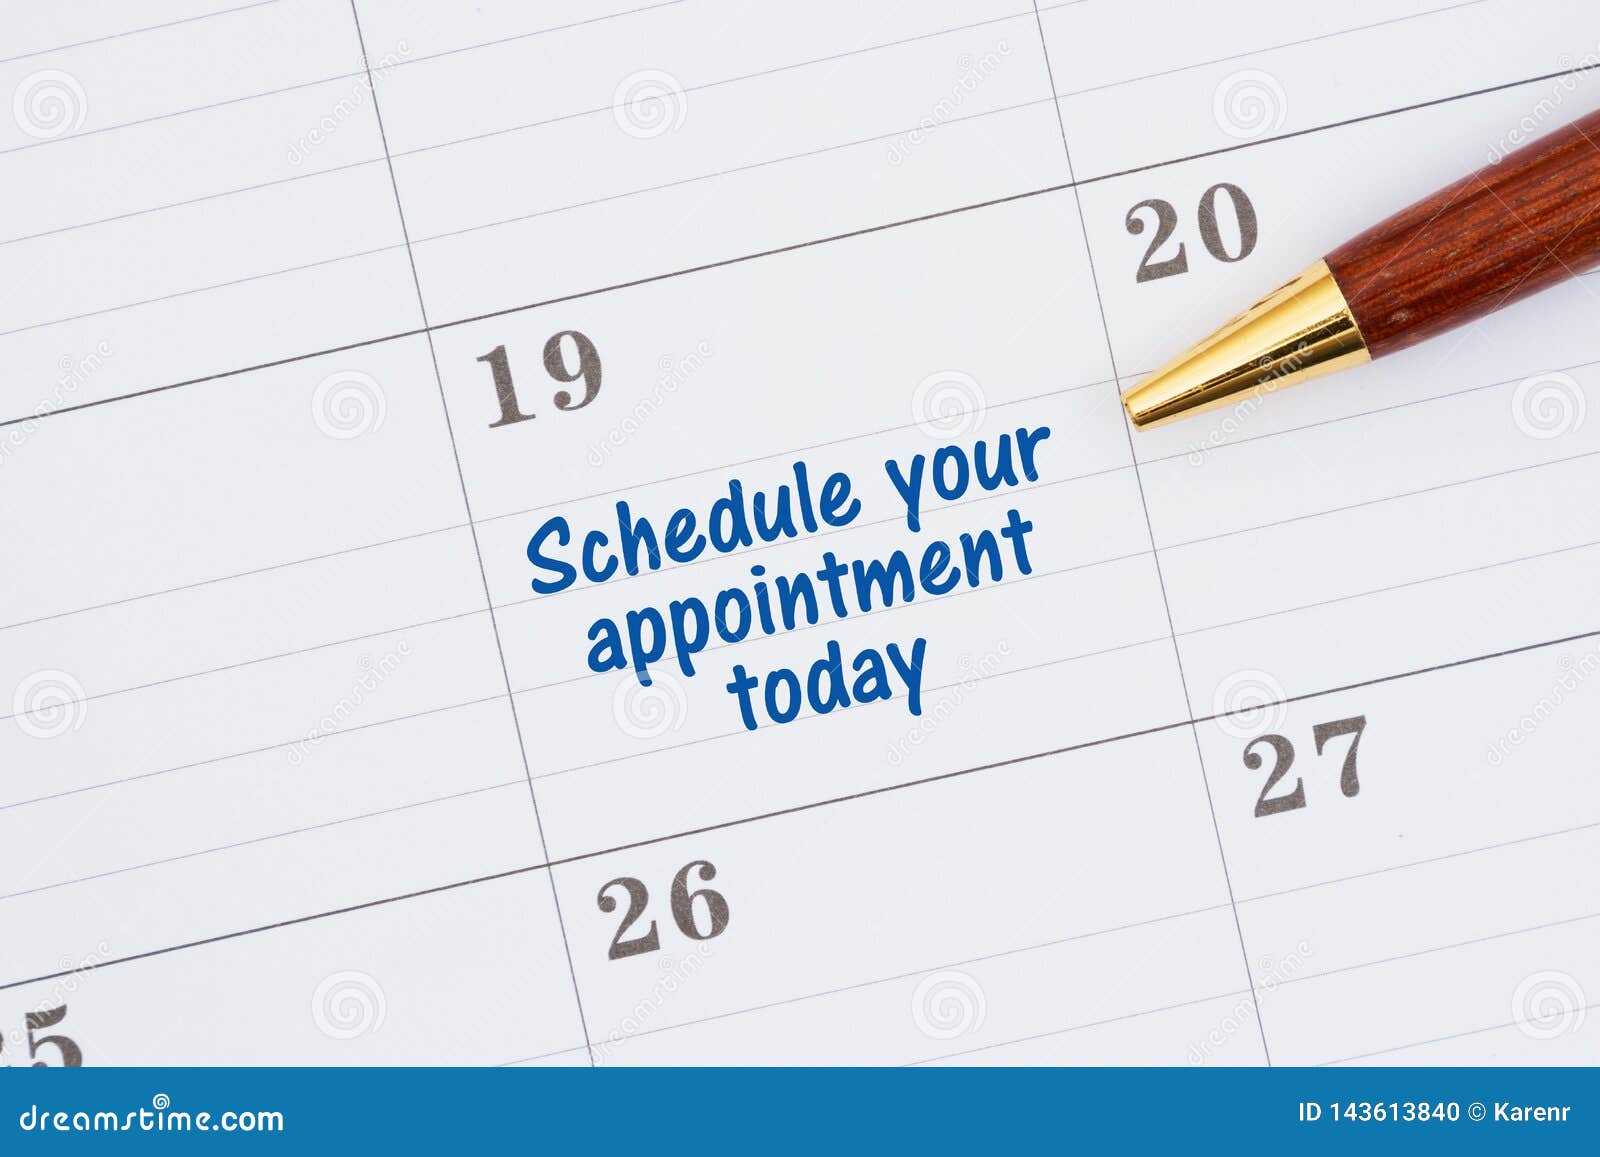 scheduling your appointment today on a monthly calendar